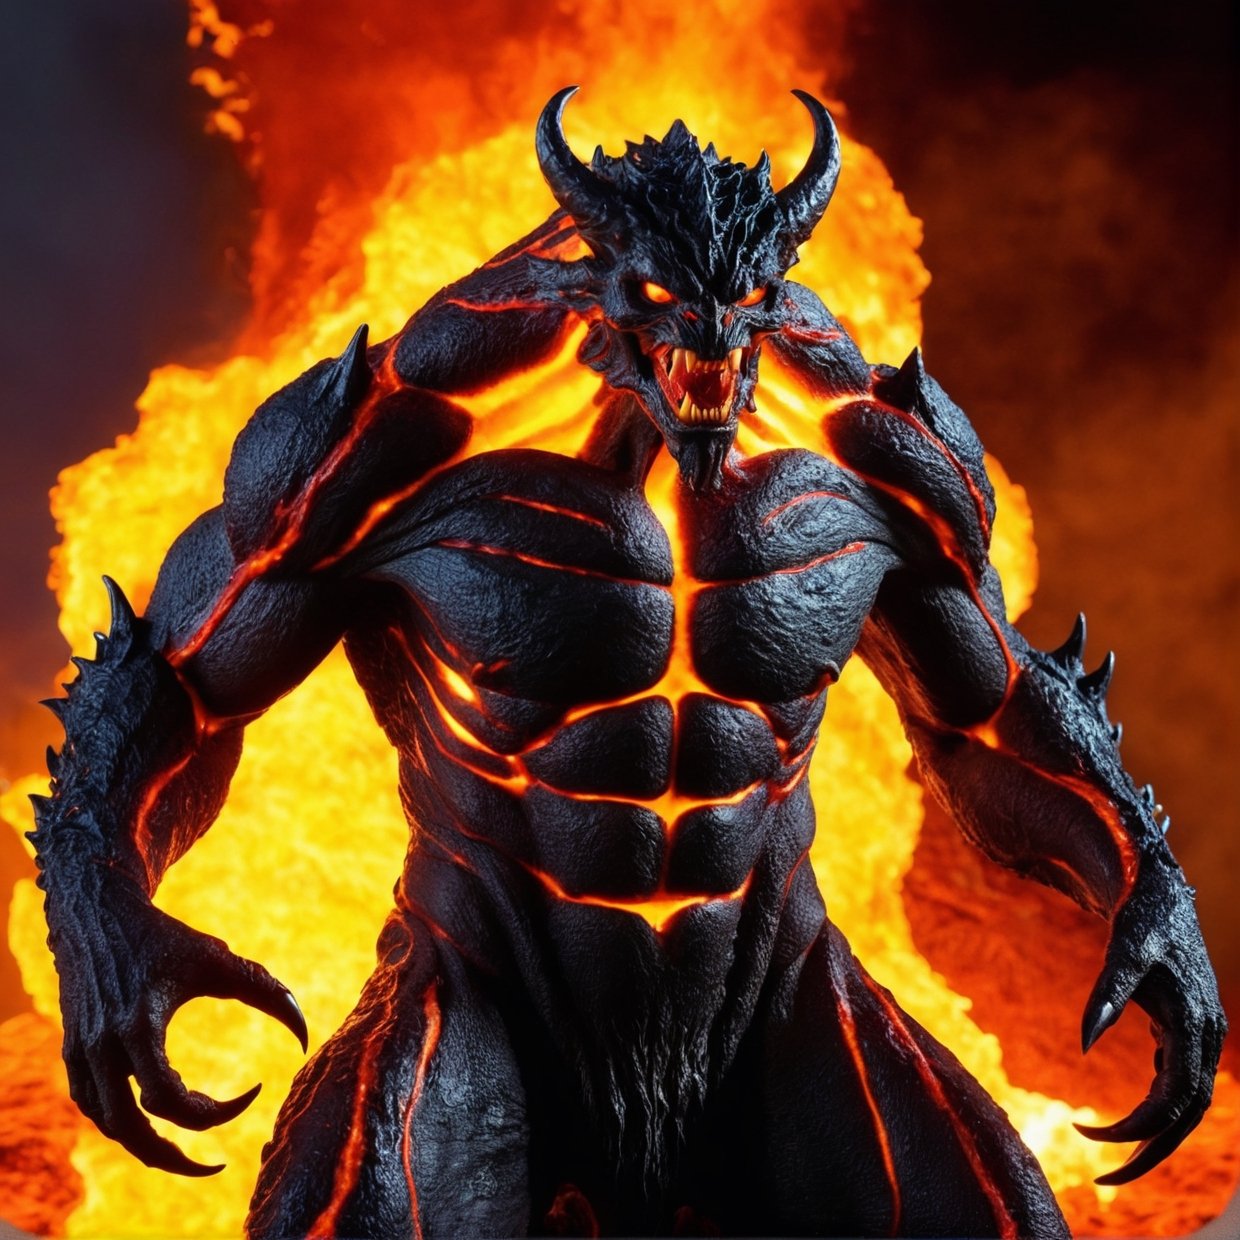 (best quality,4k,8k,highres,masterpiece:1.2),ultra-detailed,realistic,sculptural,dark and fiery,Lava Demon,blazing inferno,ominous presence,giant creature,blackened skin,glowing eyes,fierce expression,sharp claws,long fangs,burning lava flowing from its body,intense heat,smoke and ashes,volcanic rocks,surrounded by flames and magma,destructive power,fiery tendrils,demonic energy,rugged and rough texture,molten lava armor,resembling a mythical creature,emitting a sinister aura,deep red color palette with hints of orange and black,emphasizing the demonic nature of the creature,dramatic lighting with fiery orange and red hues,creating a menacing atmosphere.,background